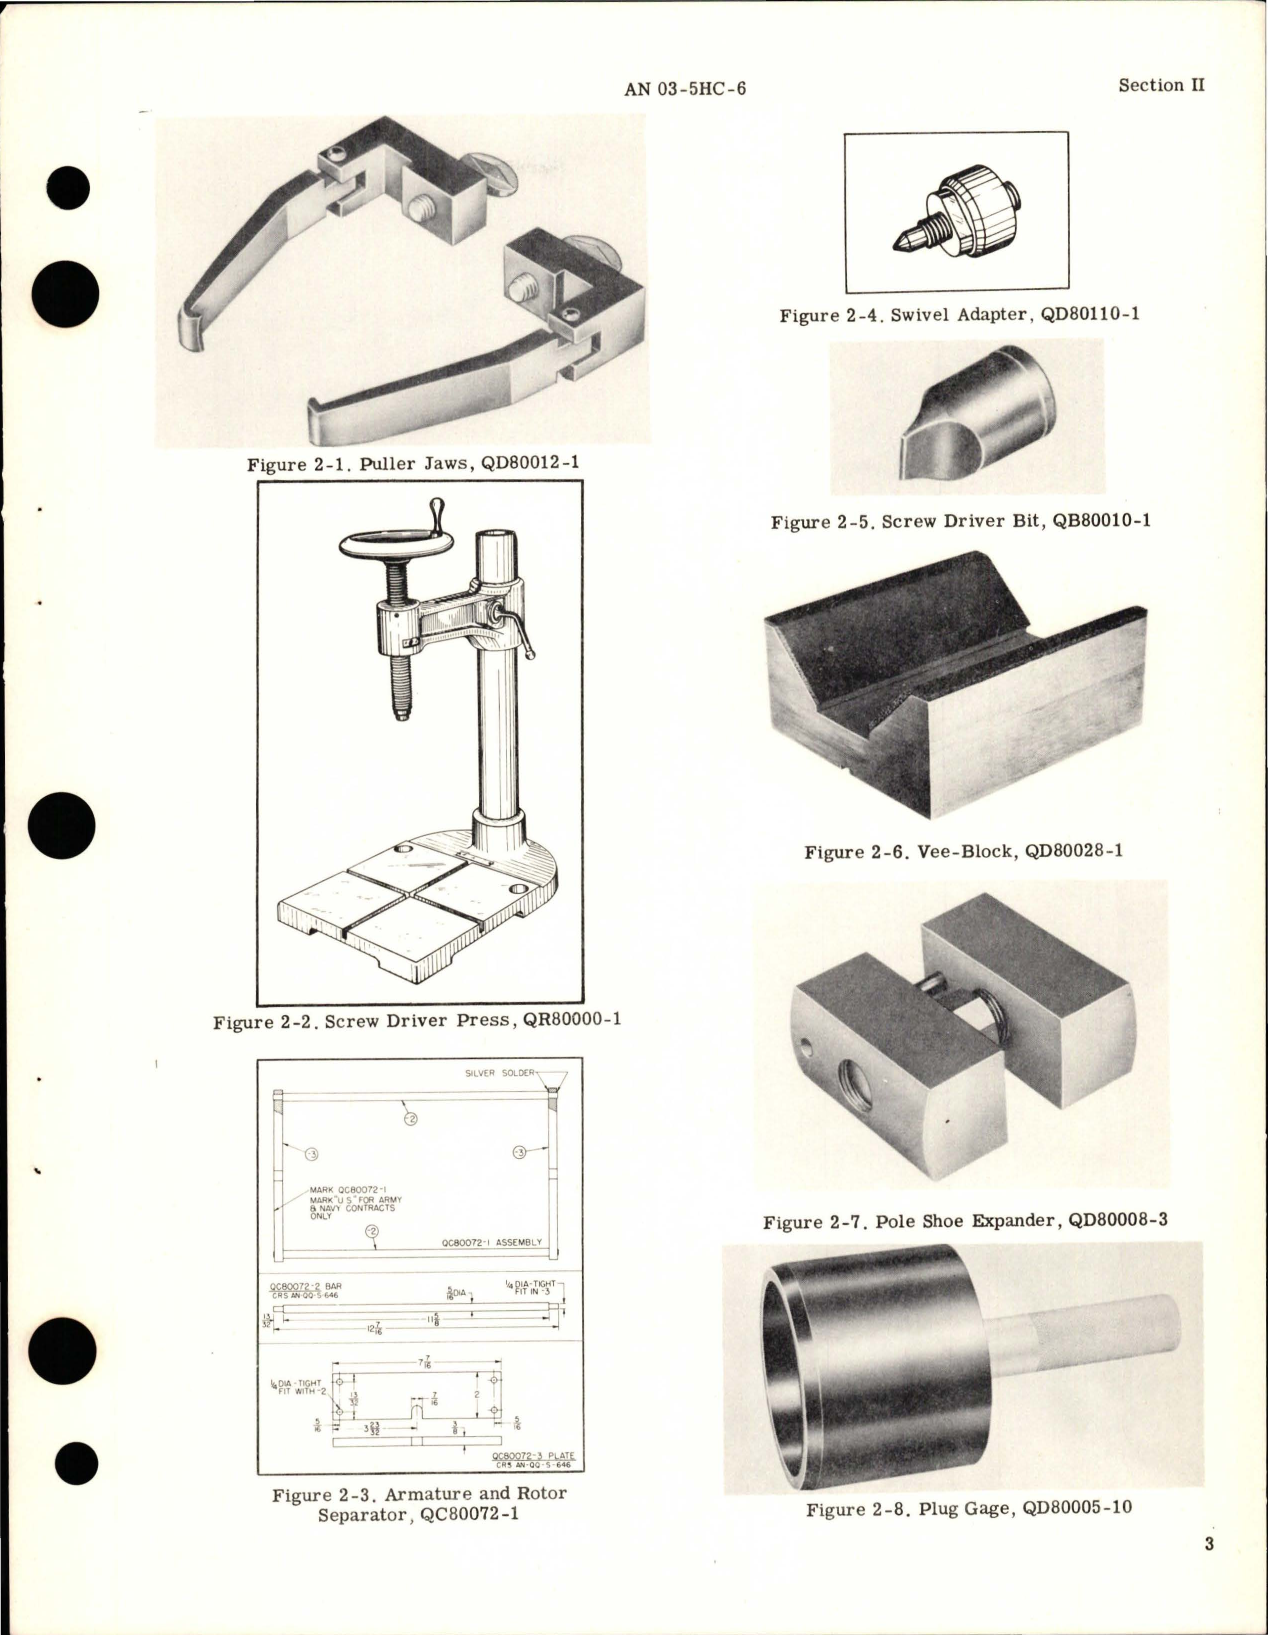 Sample page 7 from AirCorps Library document: Overhaul Instructions for Inverter - Models 1518-1-F, -G, -H